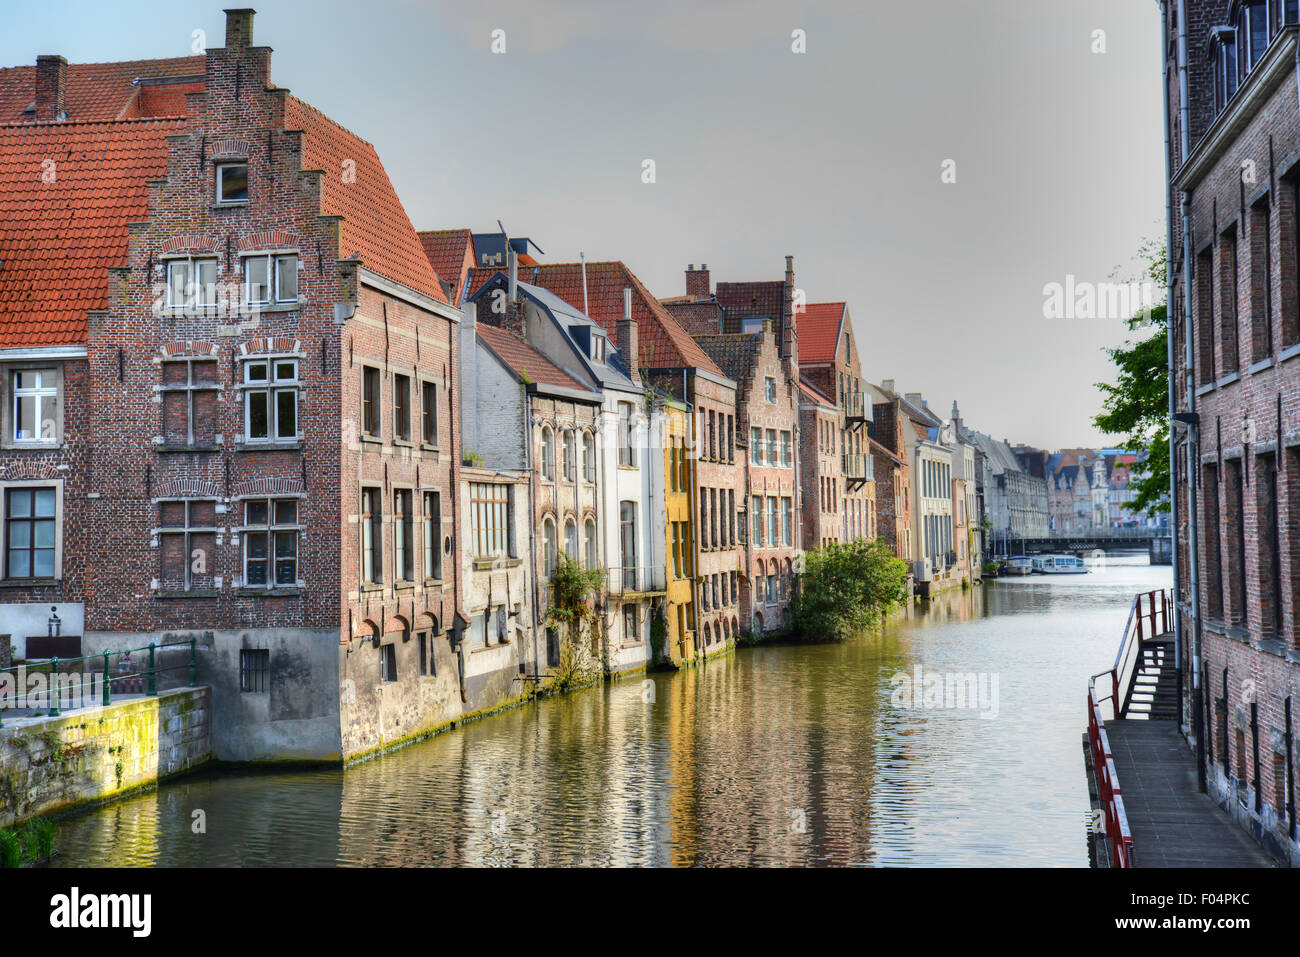 Old buildings along a canal in Gent, Belgium Stock Photo